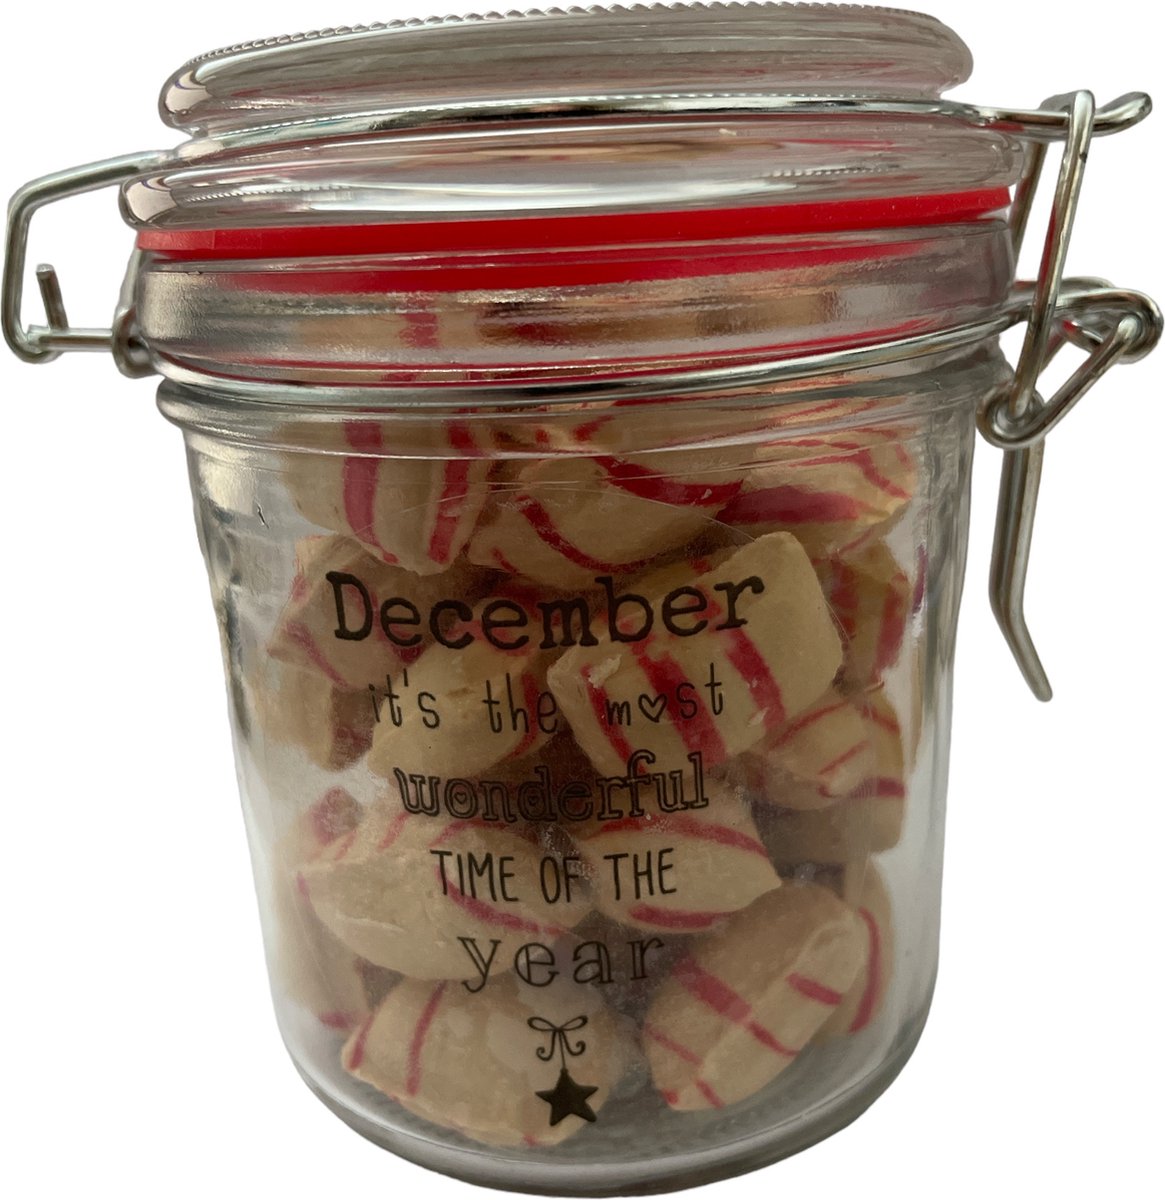 Snoeppotje gevuld 'December it's the most wonderful time of the year'